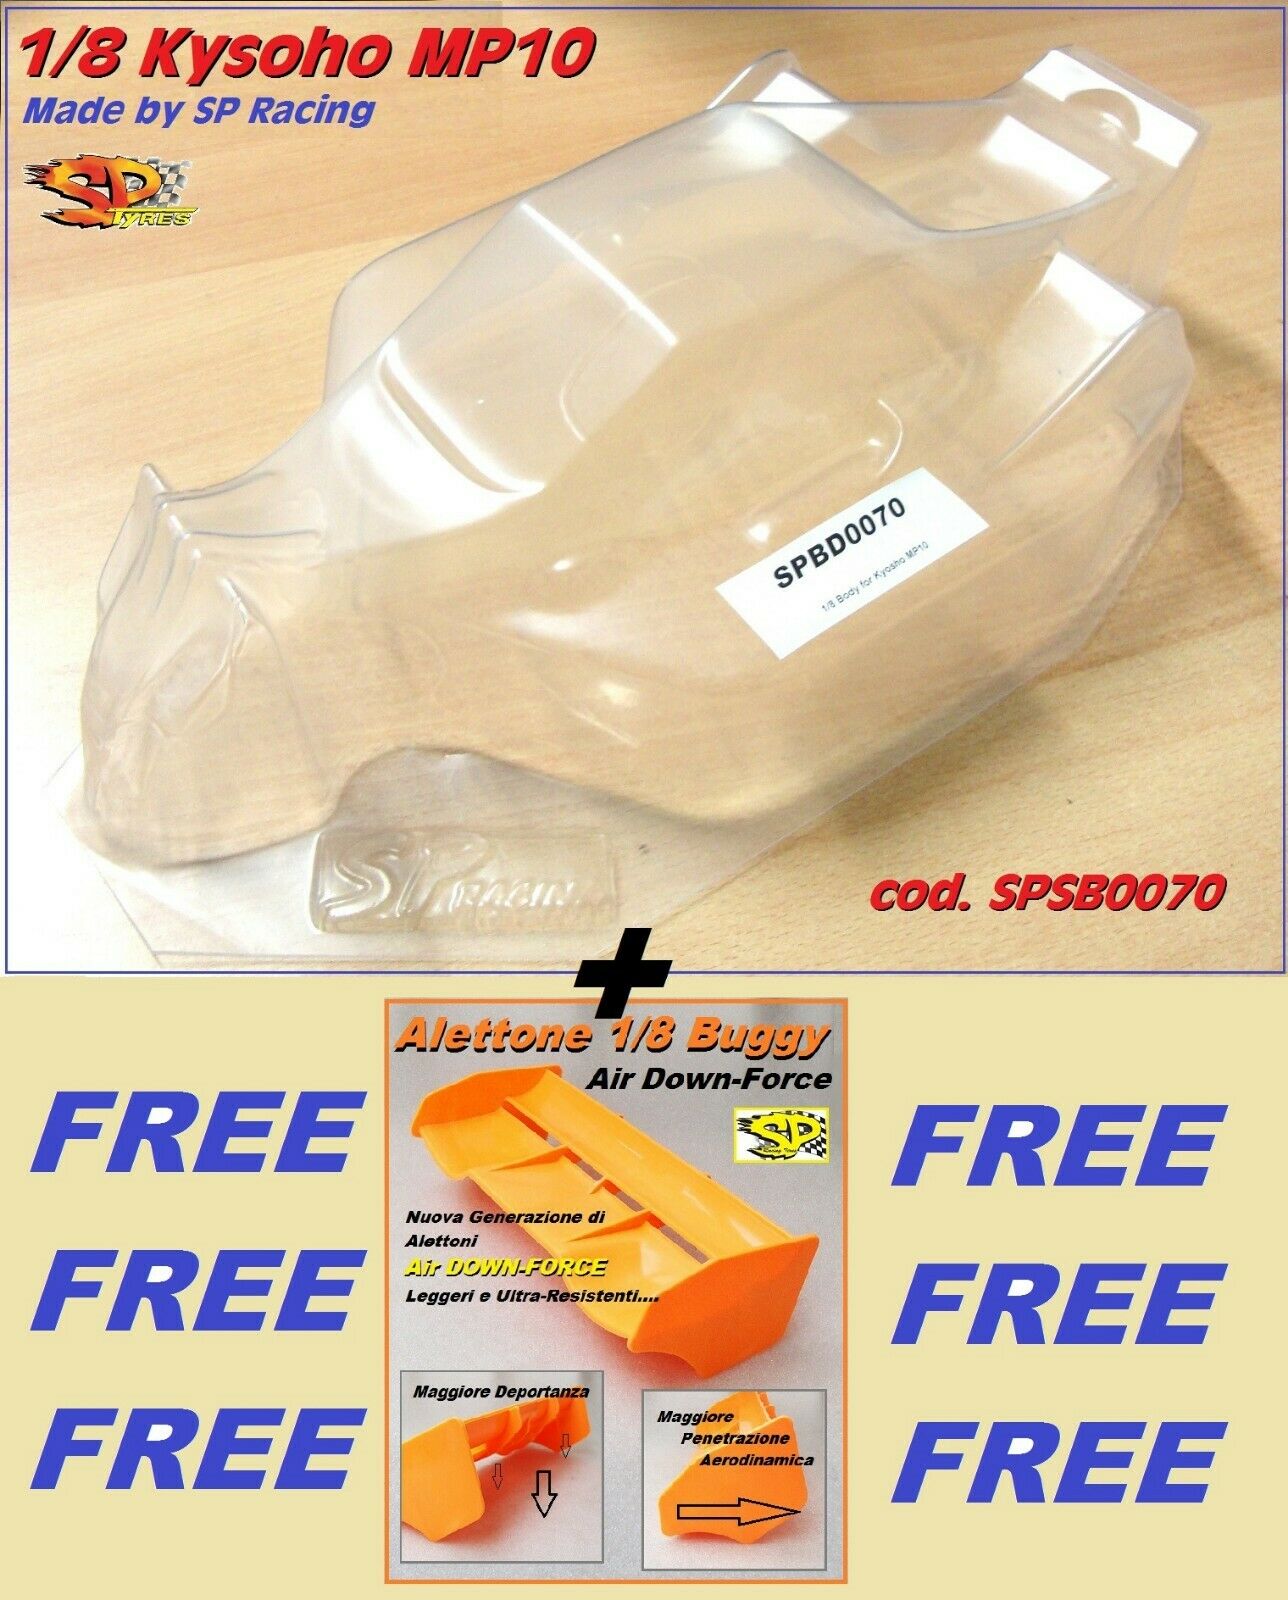 Off Road clear body for 1/8 MP10 + AILERO FREE